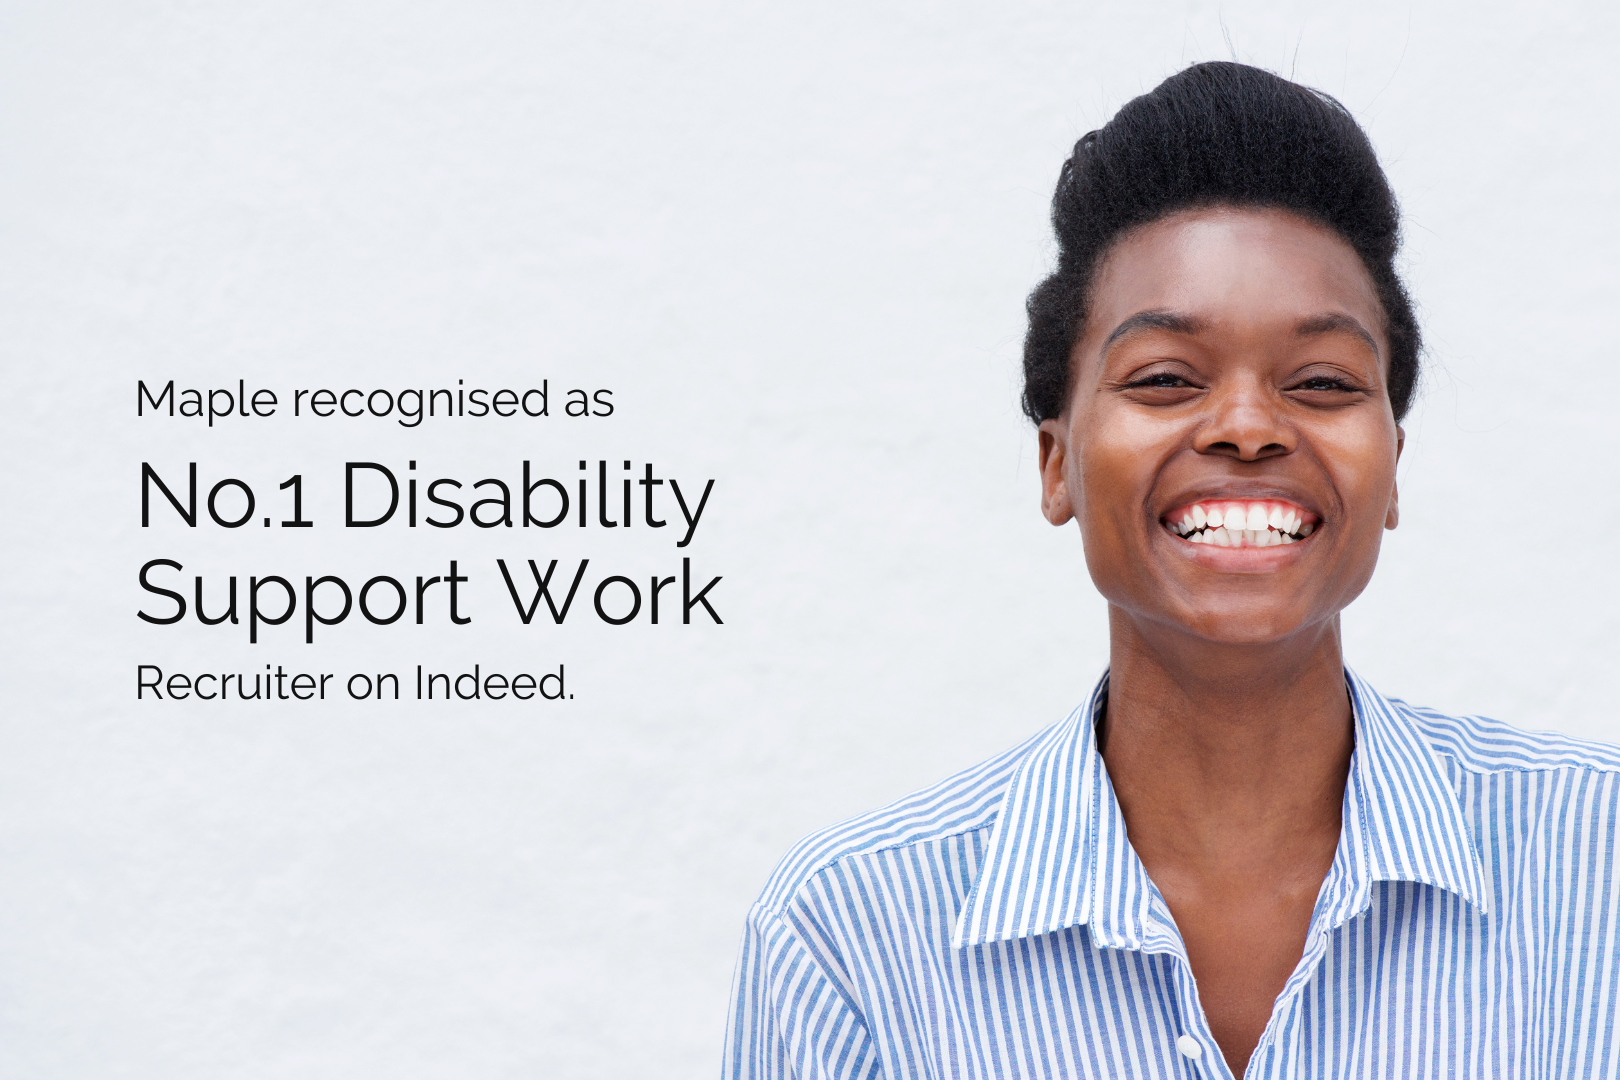 Maple recognised as Number 1 Disability Support Worker Recruiter by Indeed